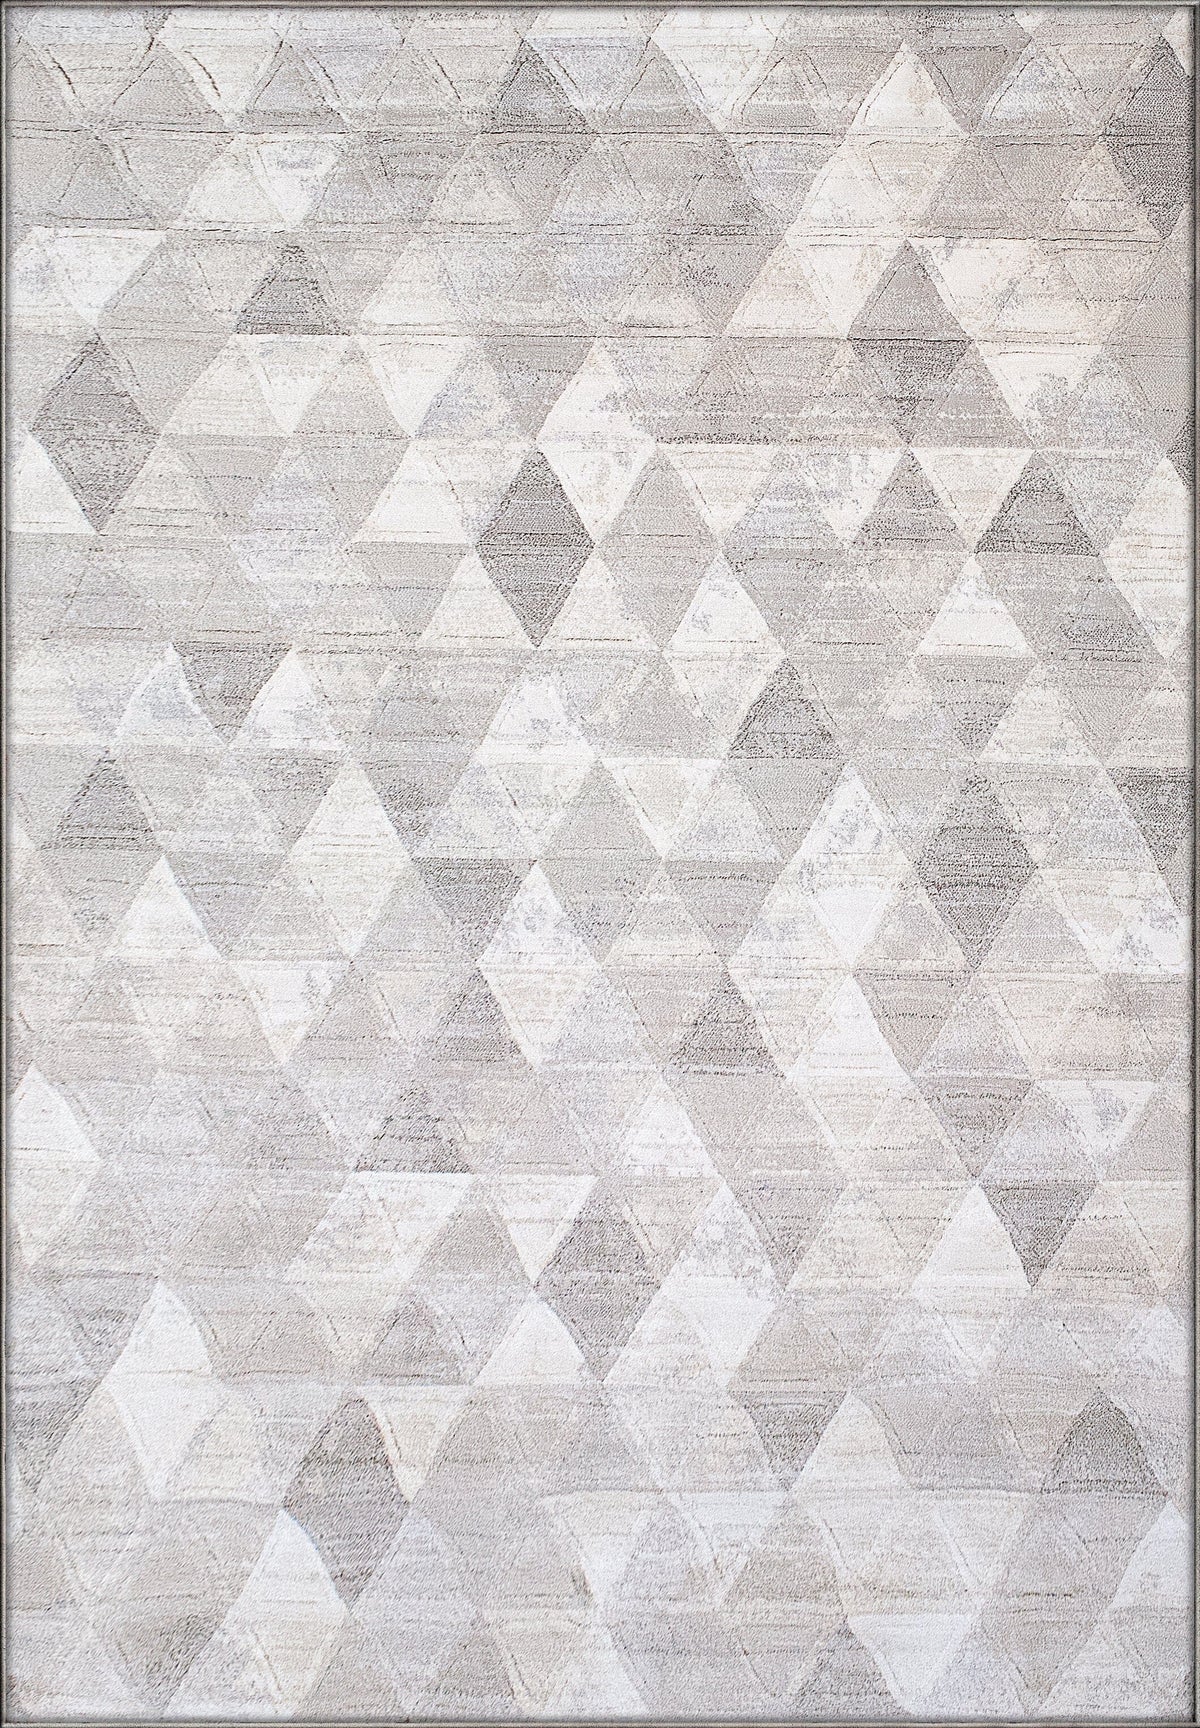 Anne Klein Beige The Illusions Contemporary Geometric Rug Collection